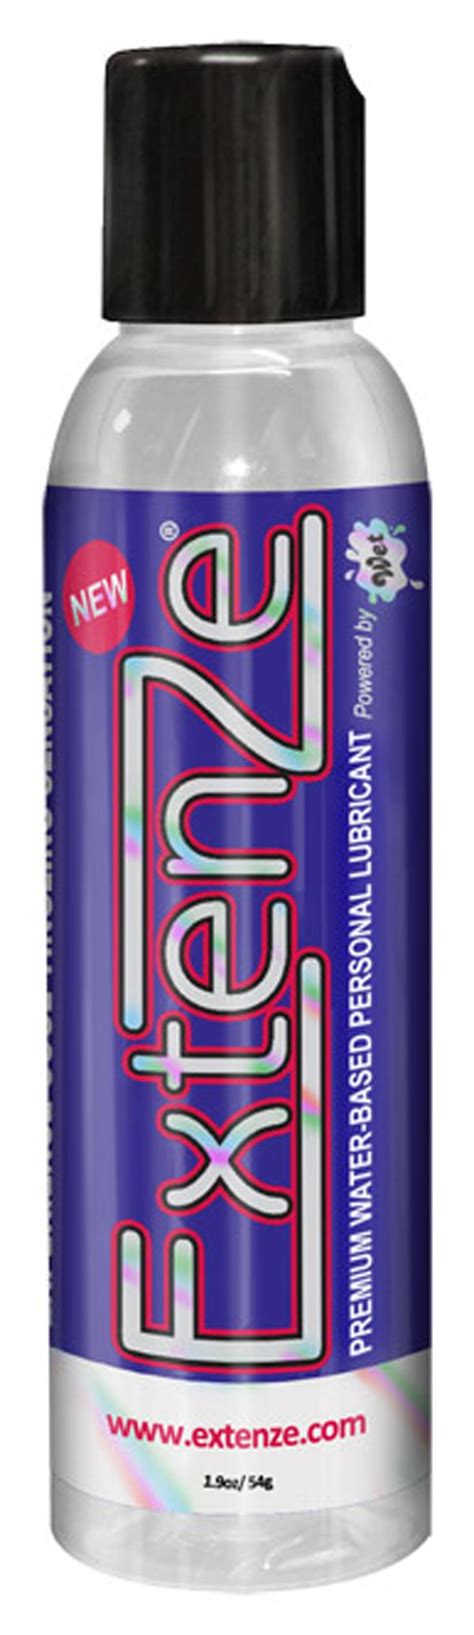 Extenze Premium Water Based Lubricant 4 8 Oz Wt55553 Water Based